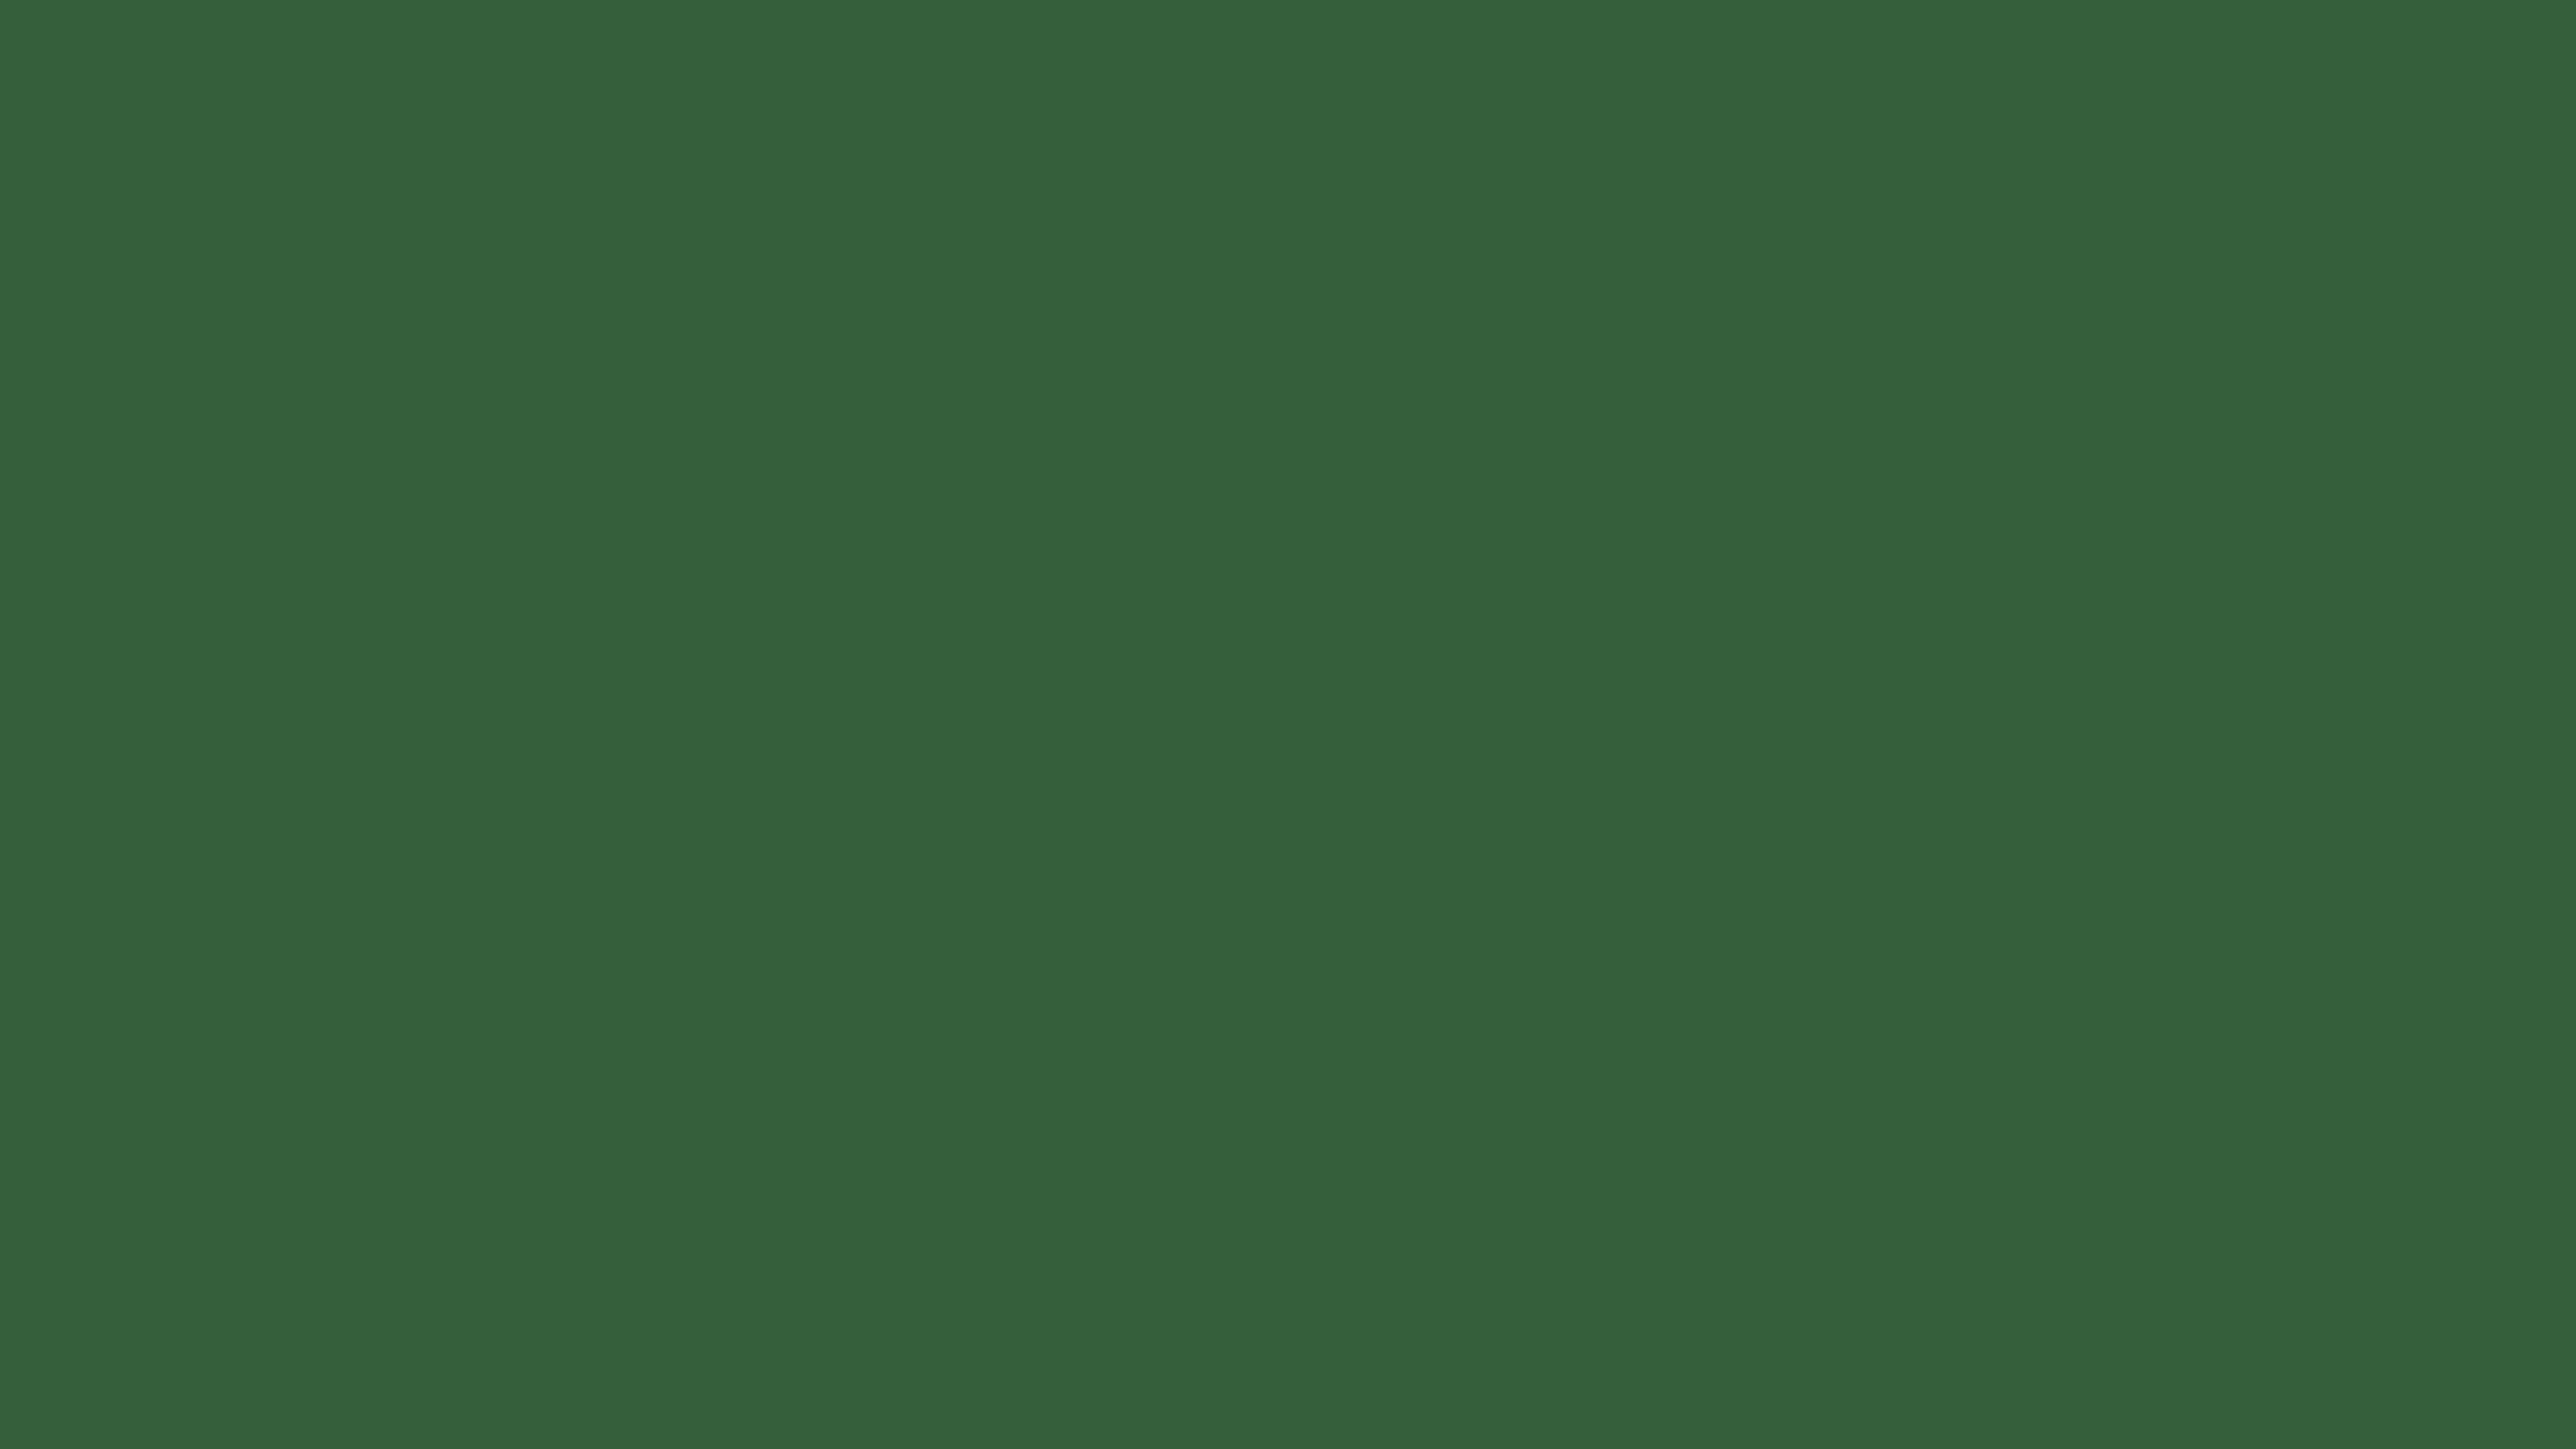 5120x2880 Hunter Green Solid Color Background